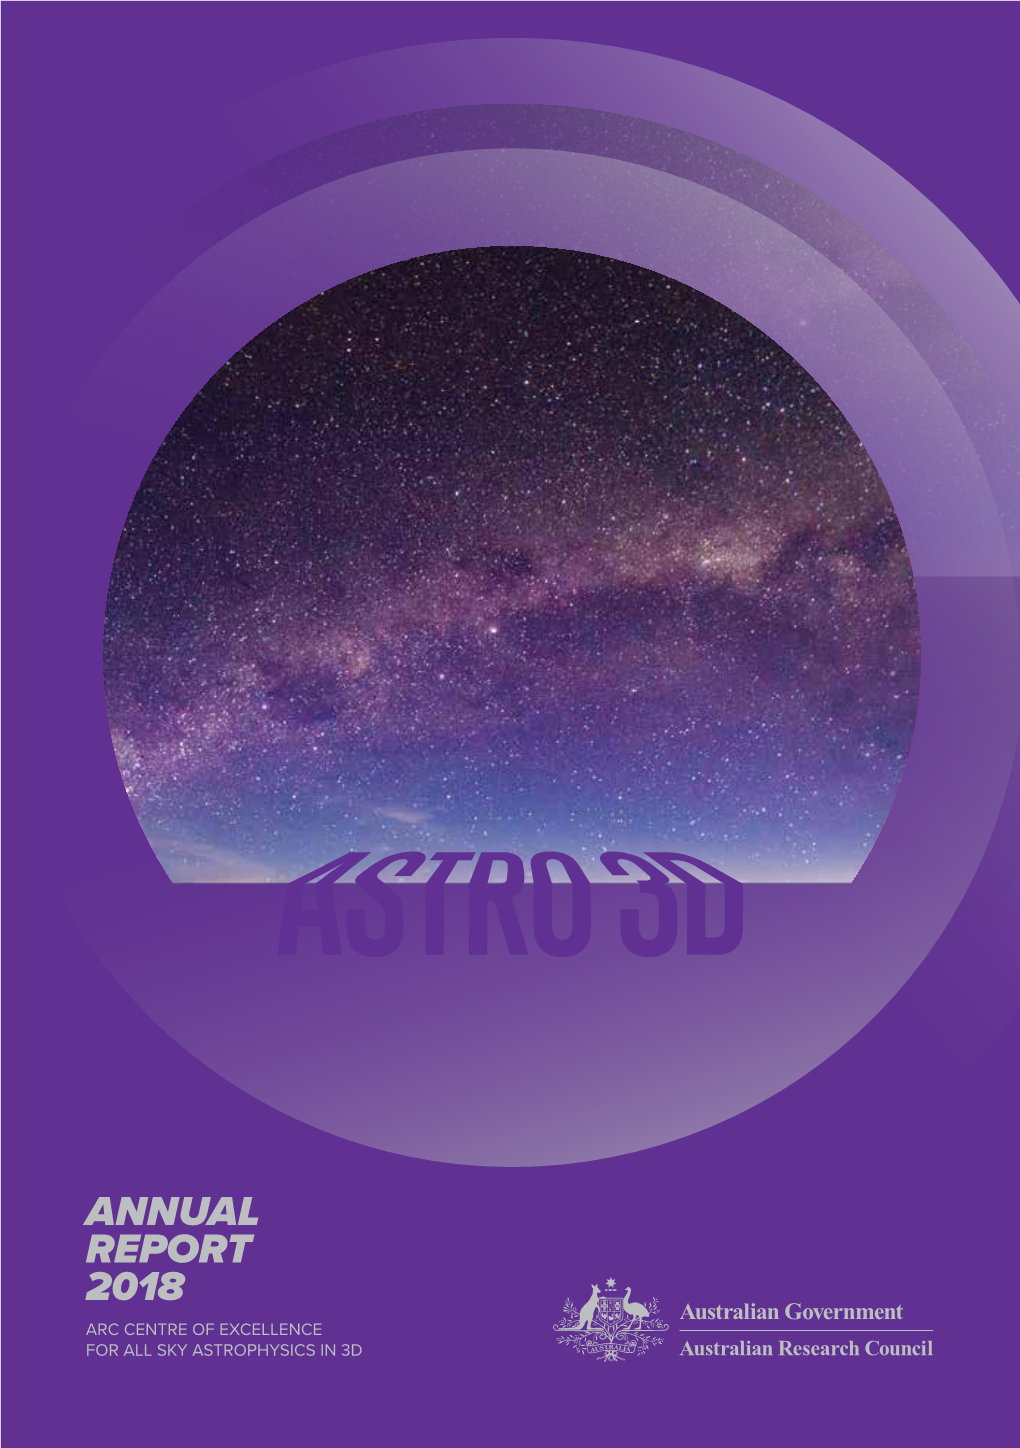 Annual Report 2018 Arc Centre of Excellence for All Sky Astrophysics in 3D Acknowledgement